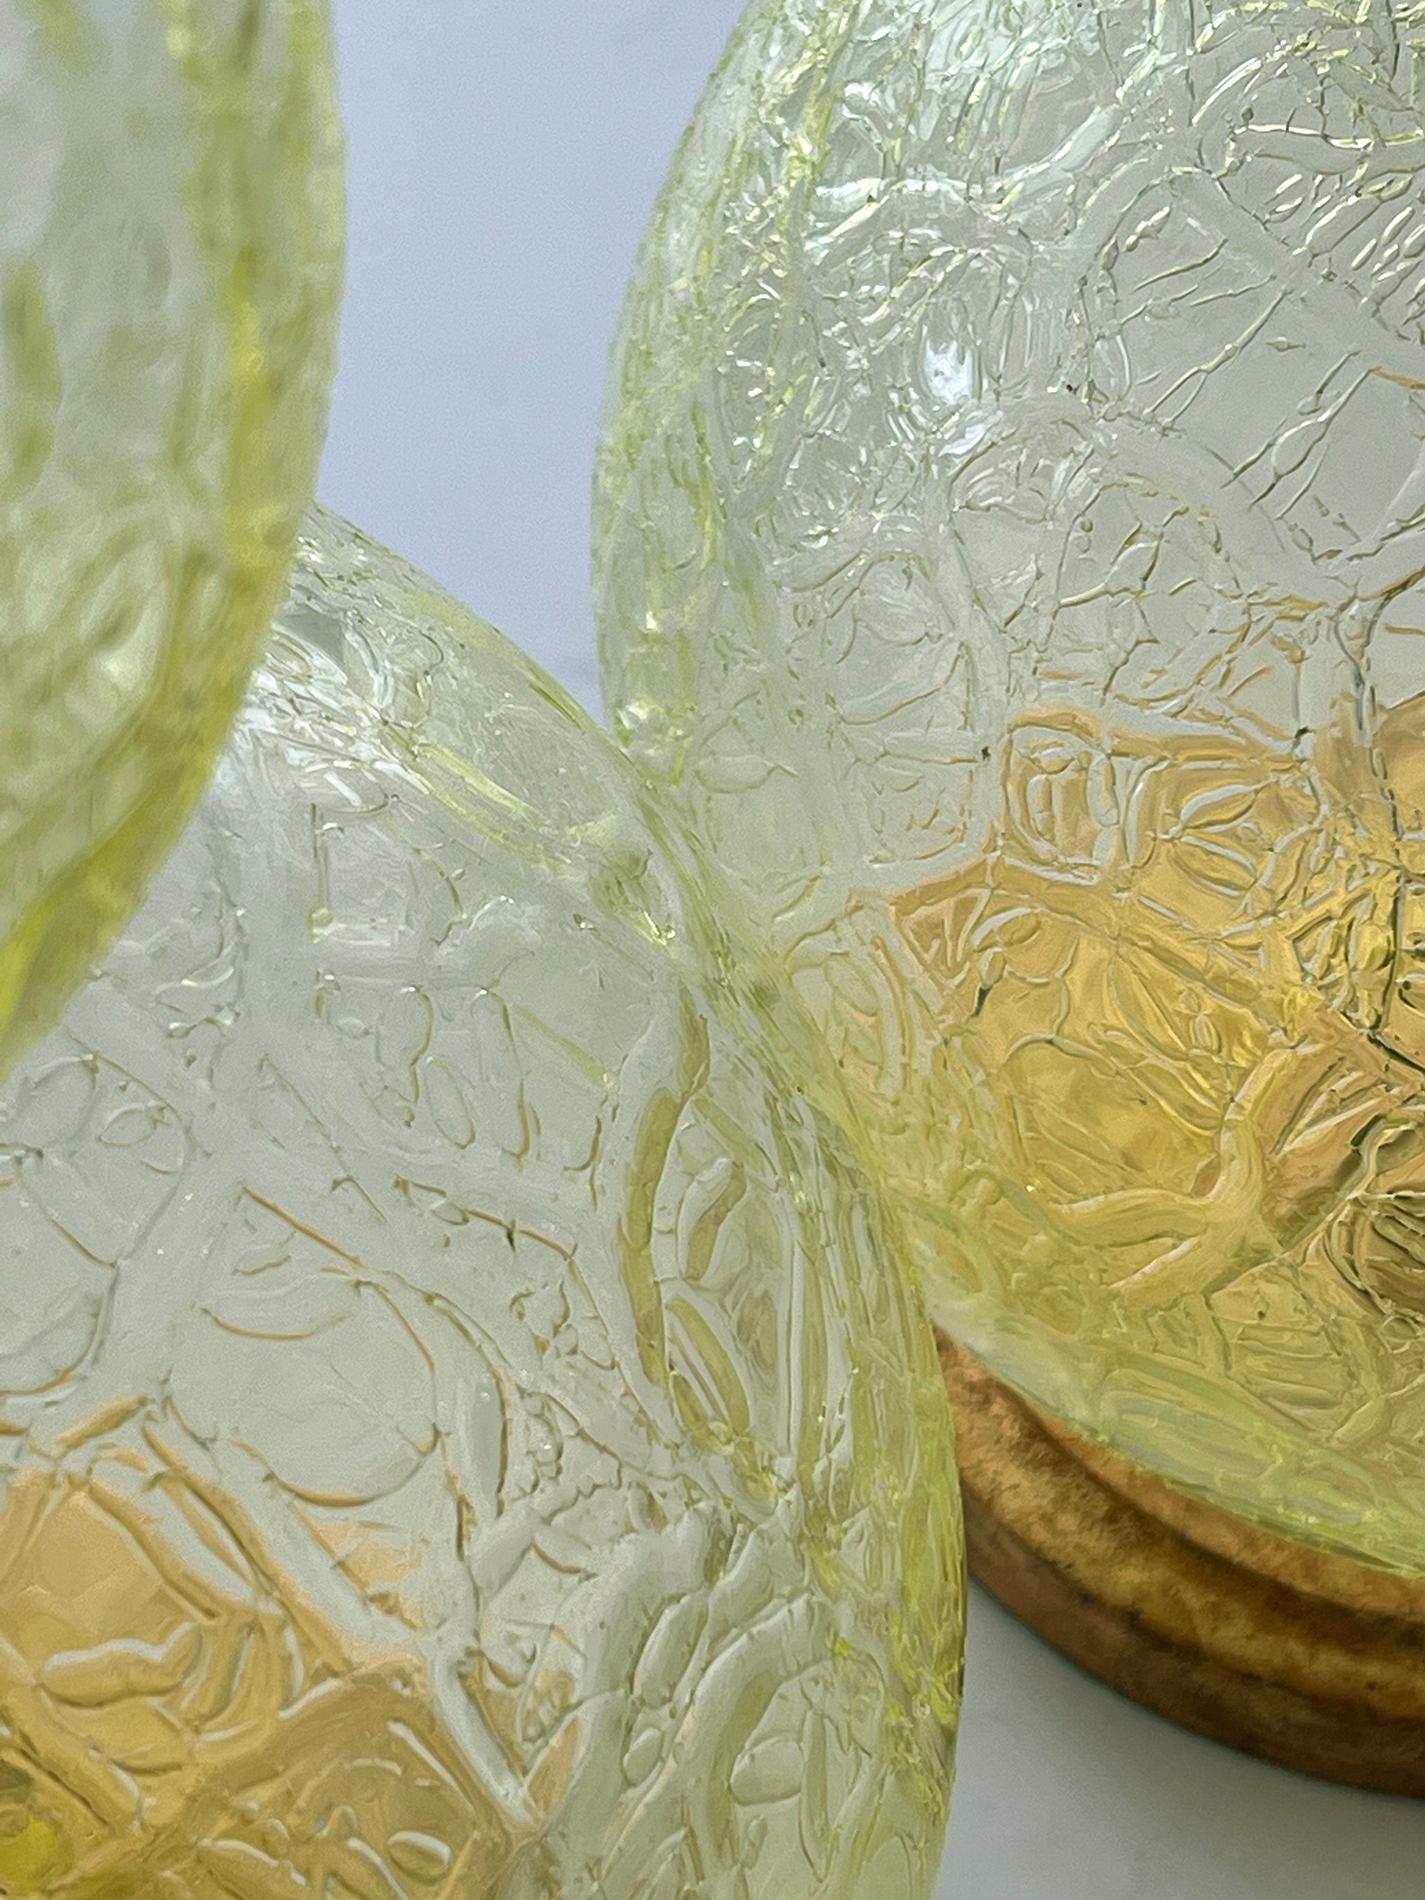 Hand-Crafted A Translucent & Textured Pair of Murano Stacked Chartreuse Glass Sphere Lamps  For Sale